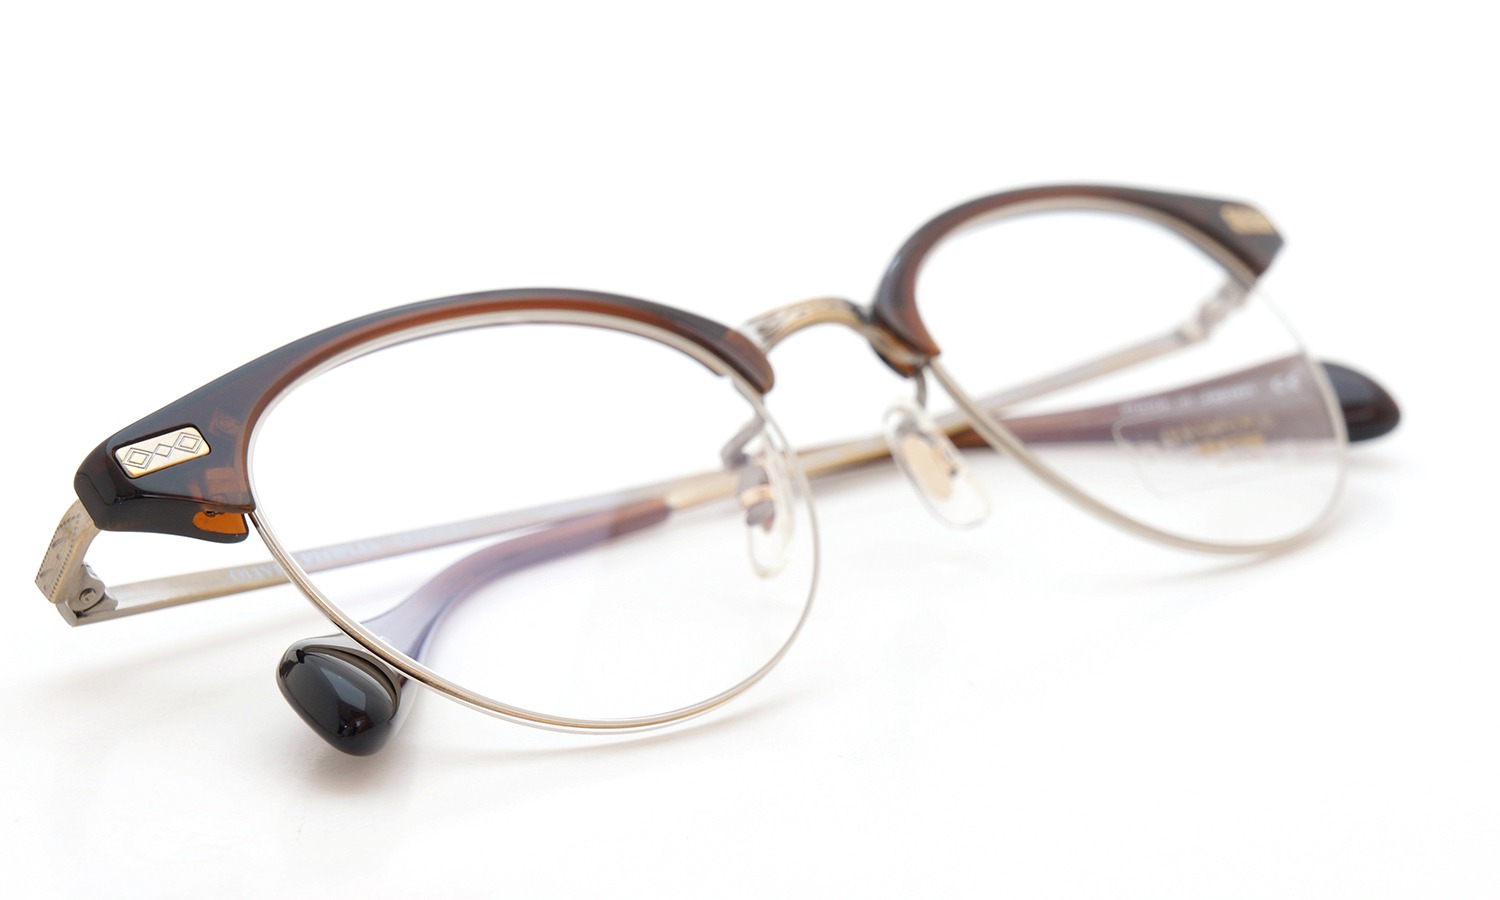 OLIVER PEOPLES THE EXECUTIVE SERIES メガネ EXECUTIVE2 ESP/AG